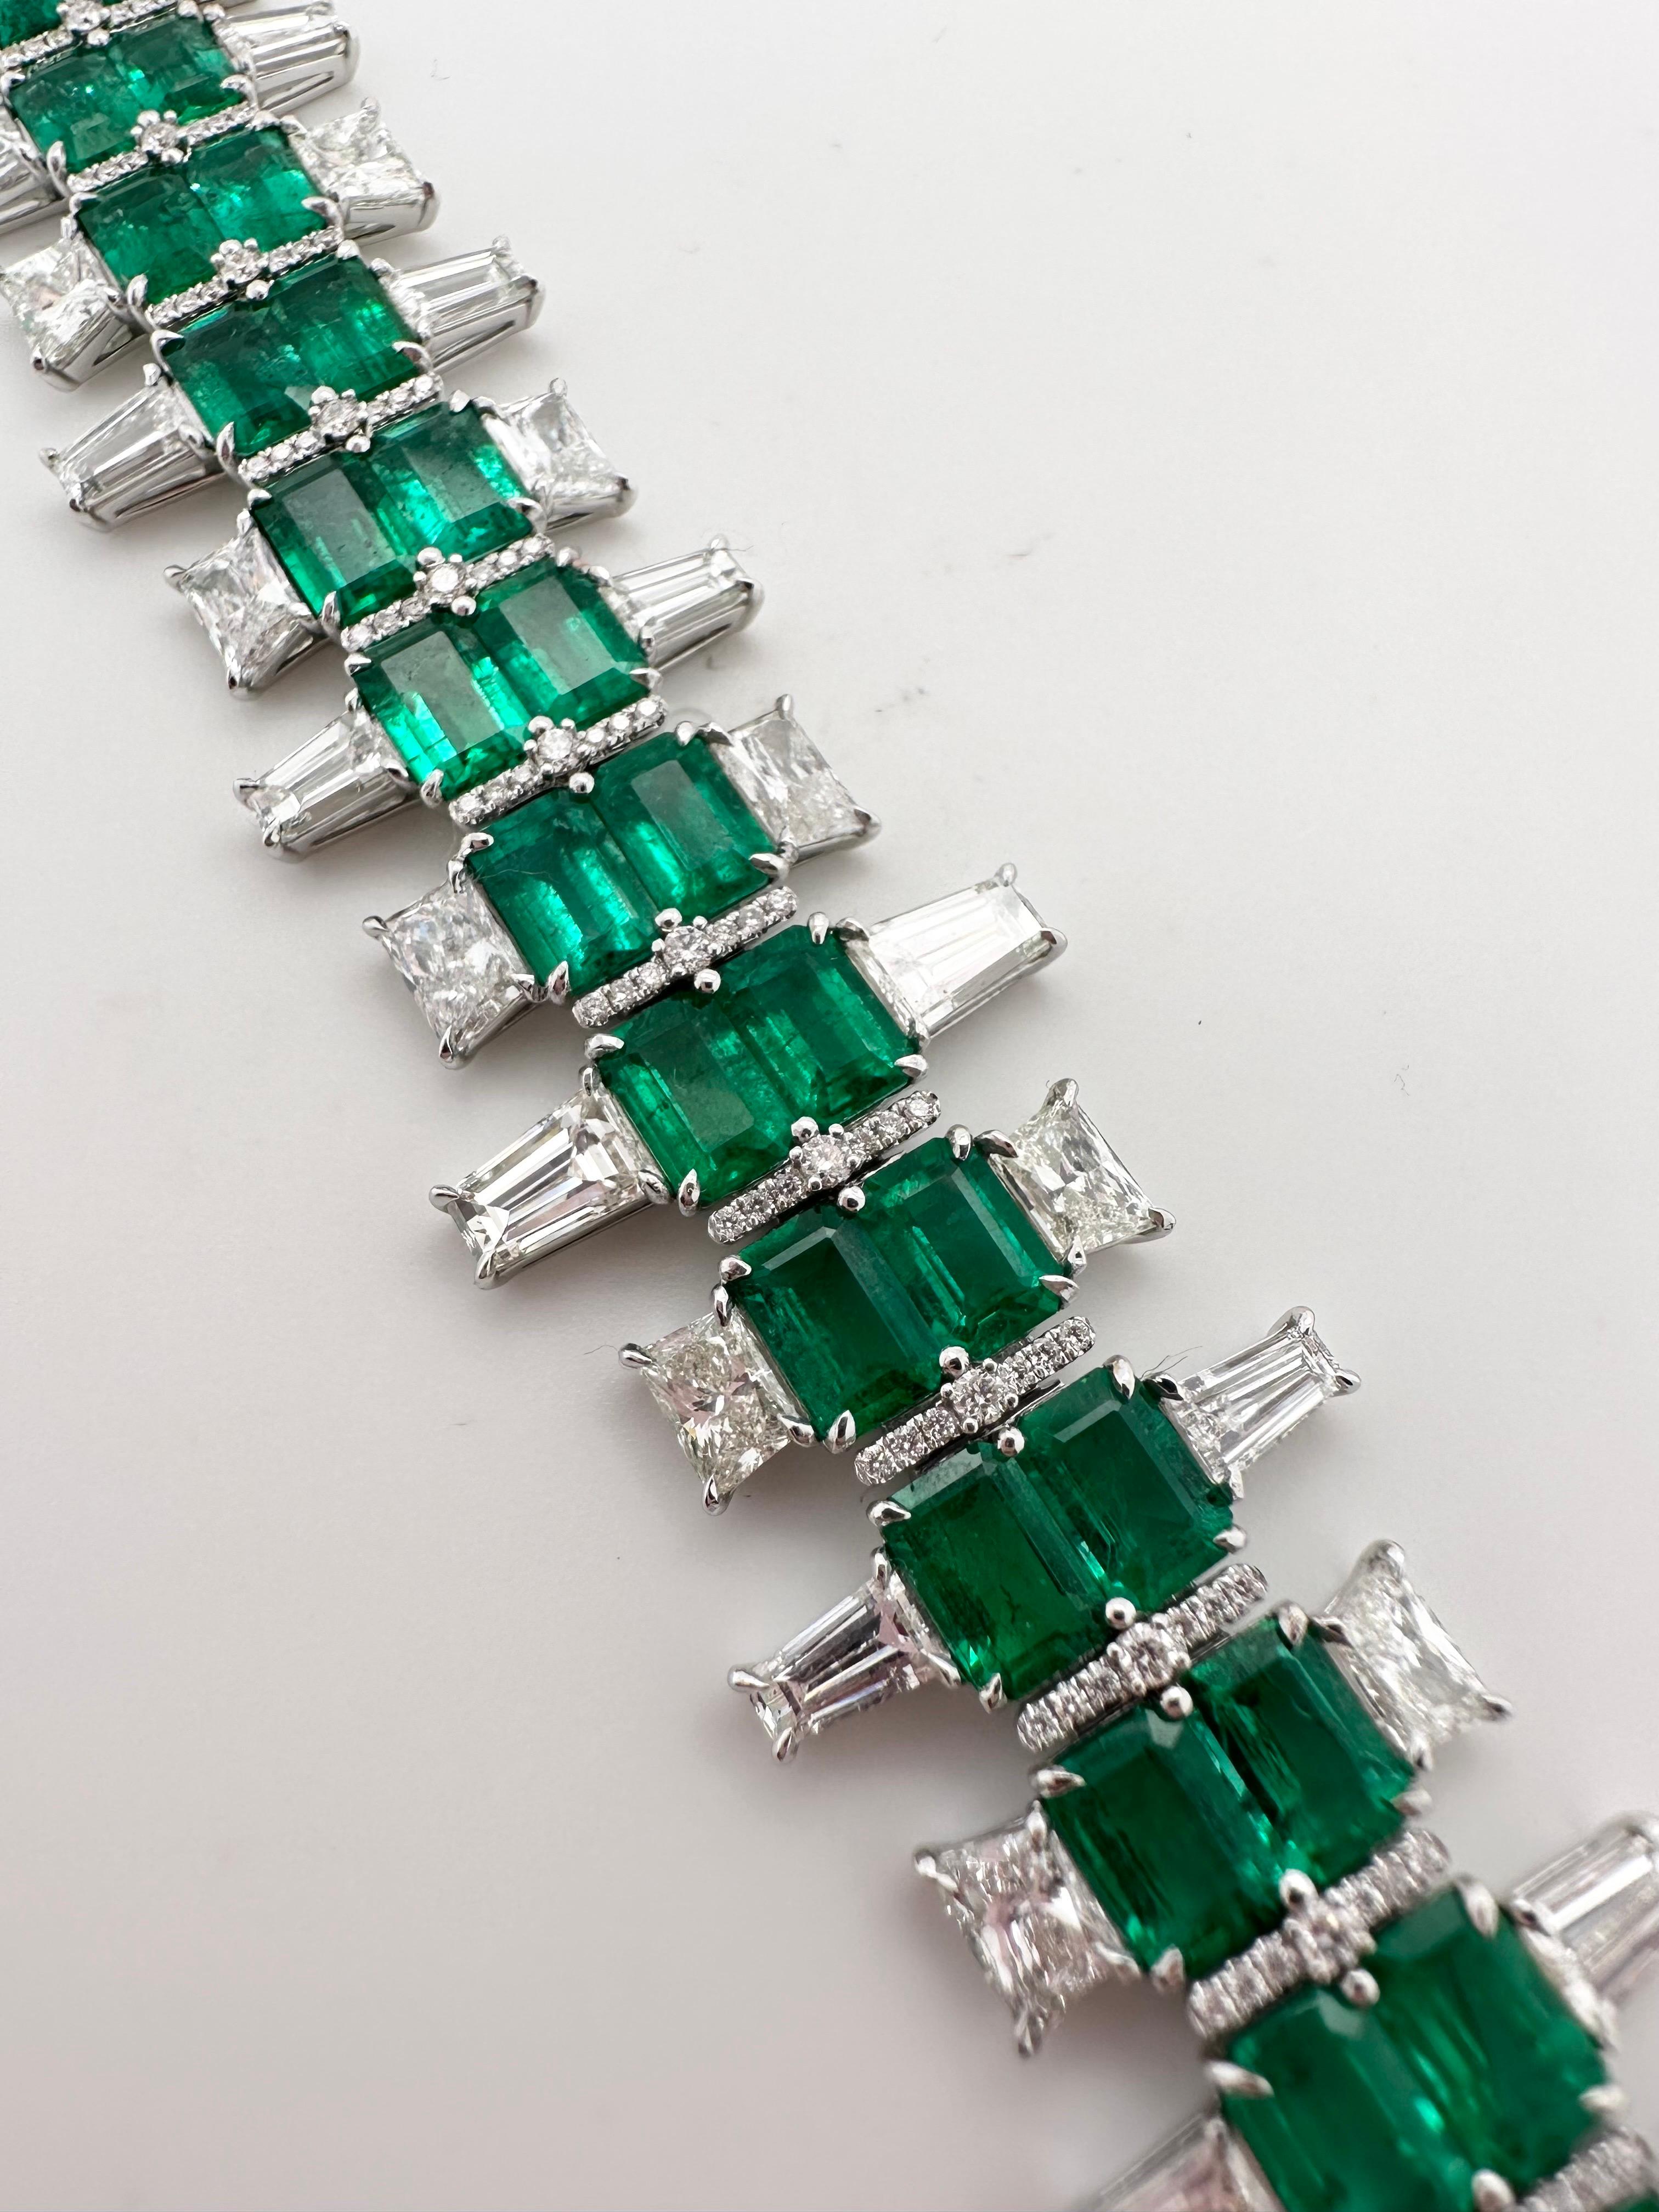 Rare matching emerald and diamond bracelet in 18KT whte gold. The bracelet is made in Art Deco style, creator is known. The matching emeralds are Colombian origin and are a beautiful bluish green color, the bracelet is made with a rare exquisite